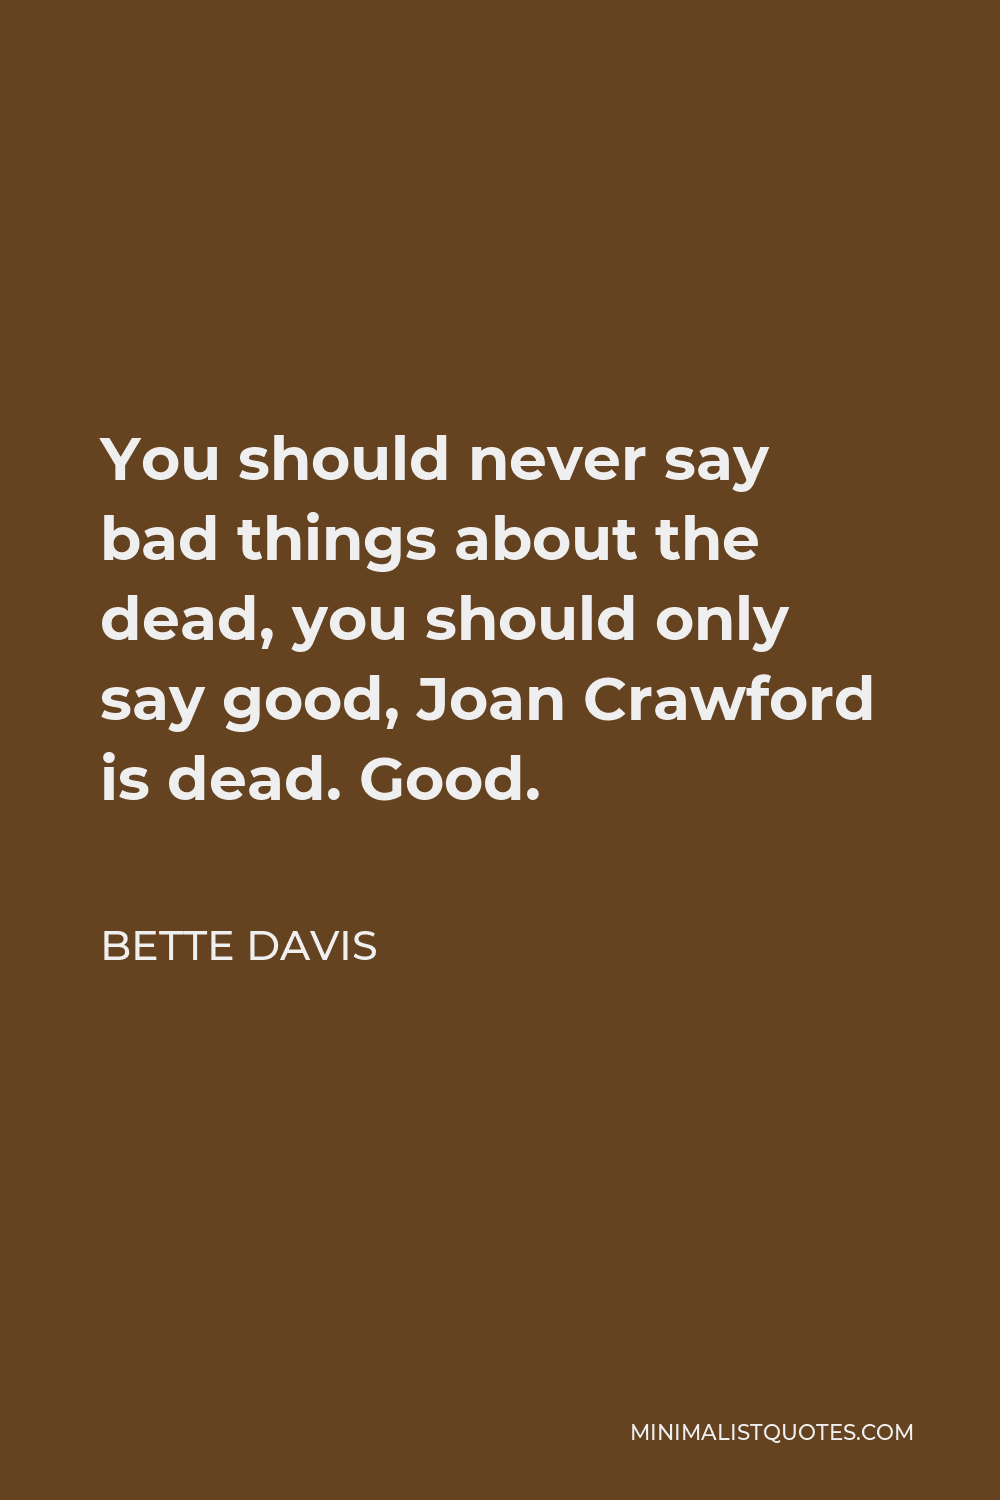 Bette Davis Quote - You should never say bad things about the dead, you should only say good, Joan Crawford is dead. Good.